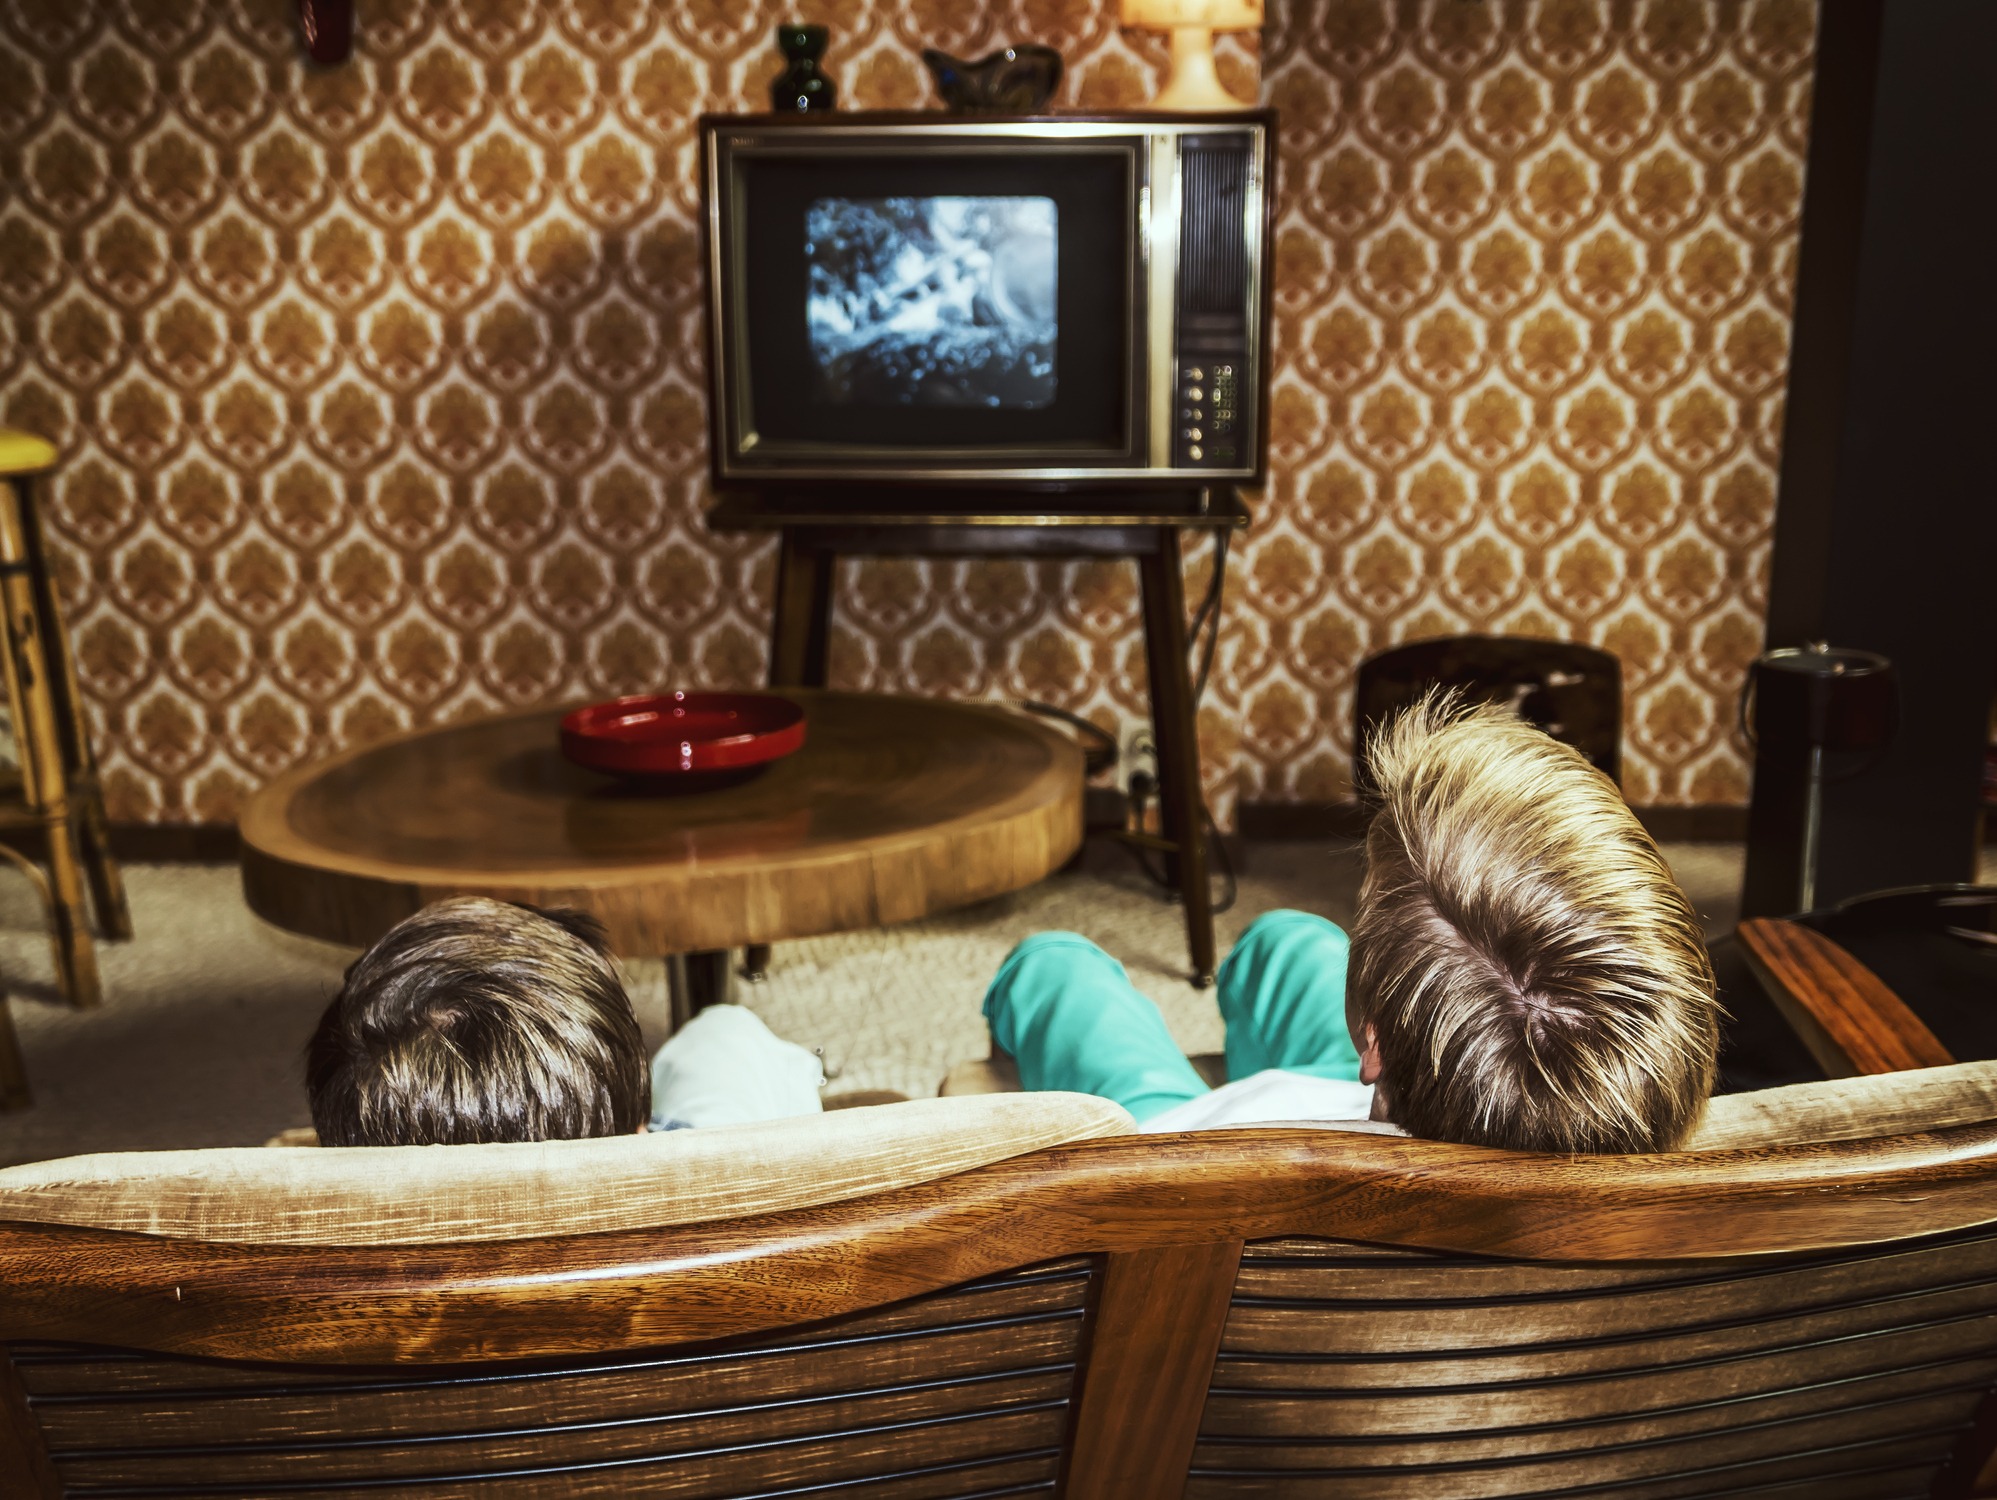 watching TV in a vintage living room